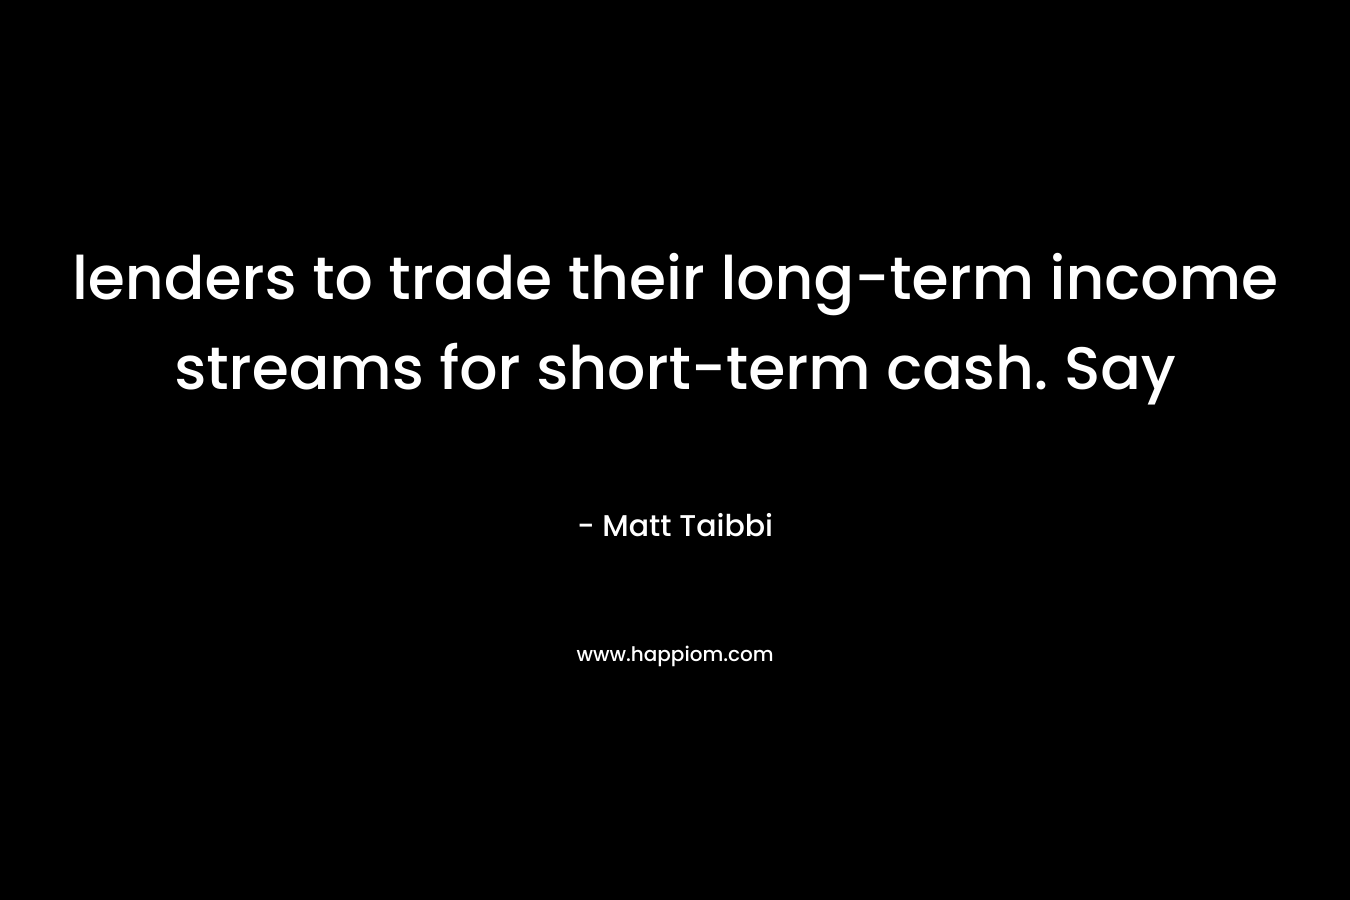 lenders to trade their long-term income streams for short-term cash. Say